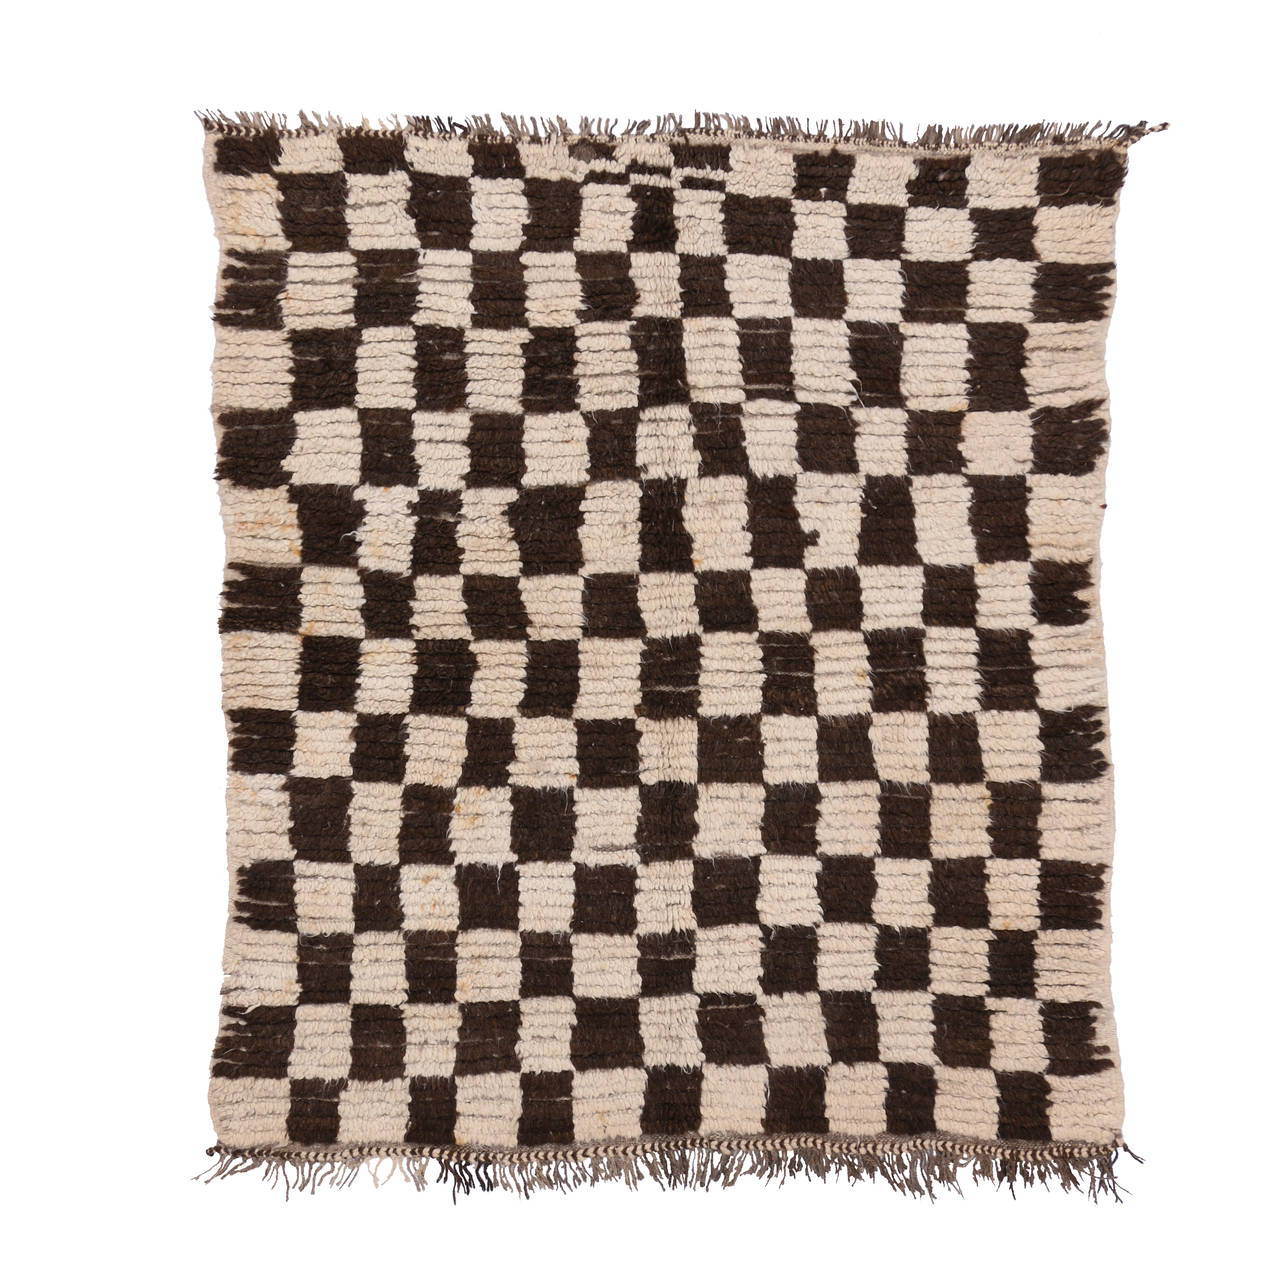 74571 Vintage Berber Moroccan Rug with Retro Checkerboard Design and Cubism Style. With its Primitive charm and checkerboard pattern, this vintage Moroccan rug synthesizes beautifully with Mid-Century Modern architecture. Alternating blocks of beige